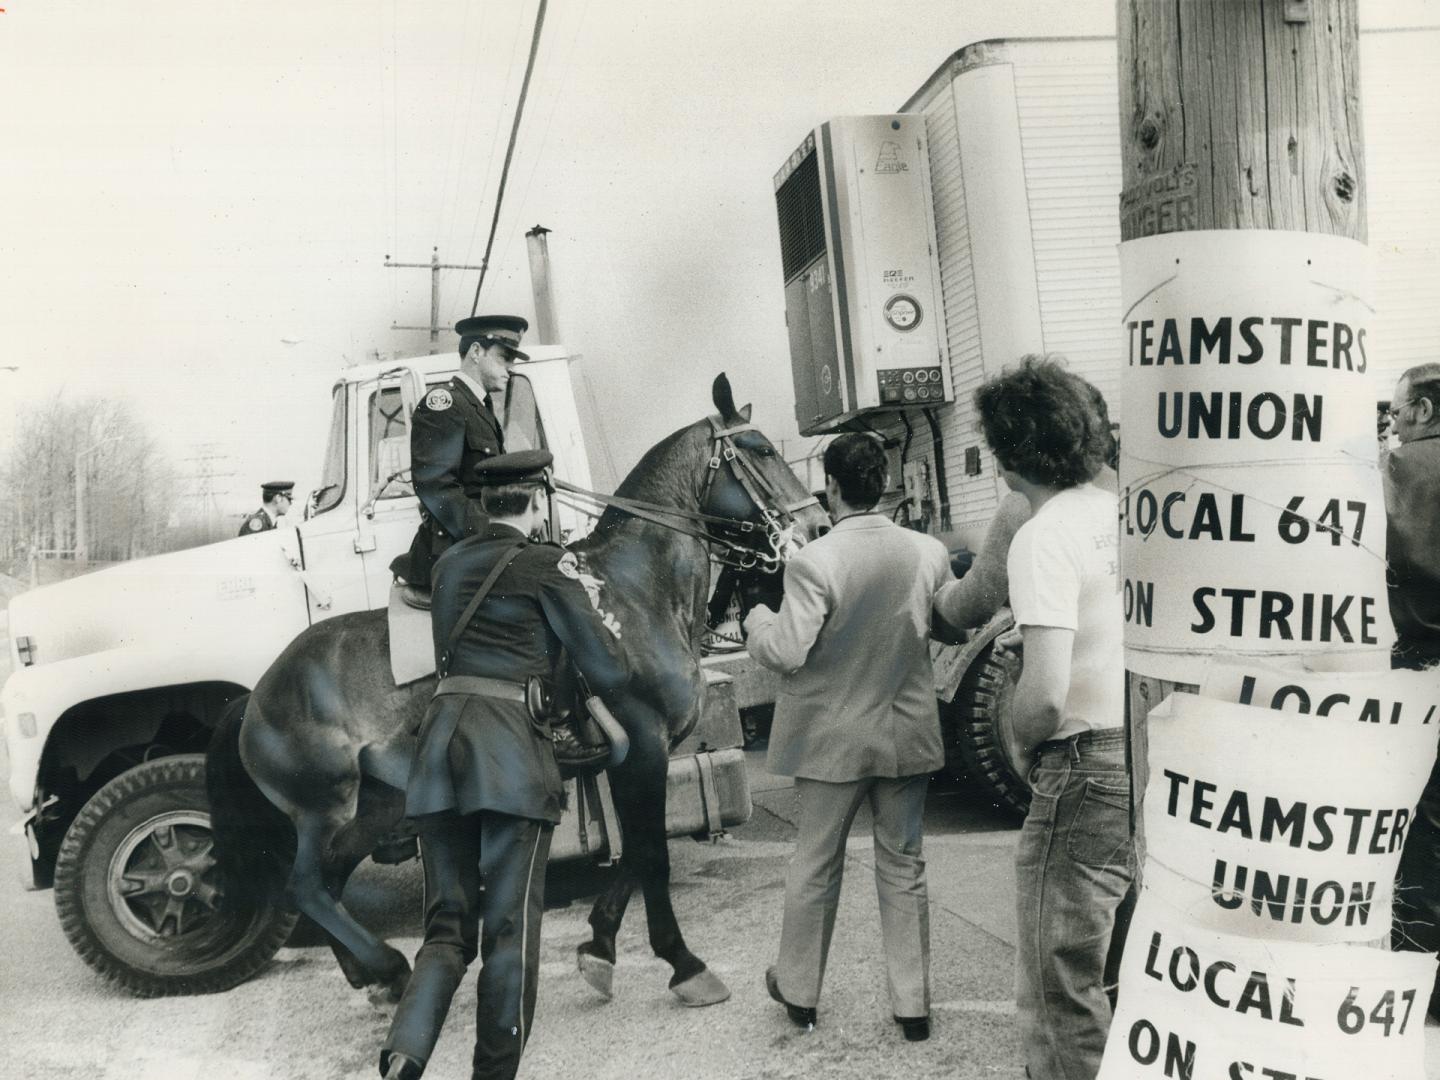 Mounted police were used today to open picket lines at the Becker Milk plant on Warden Ave